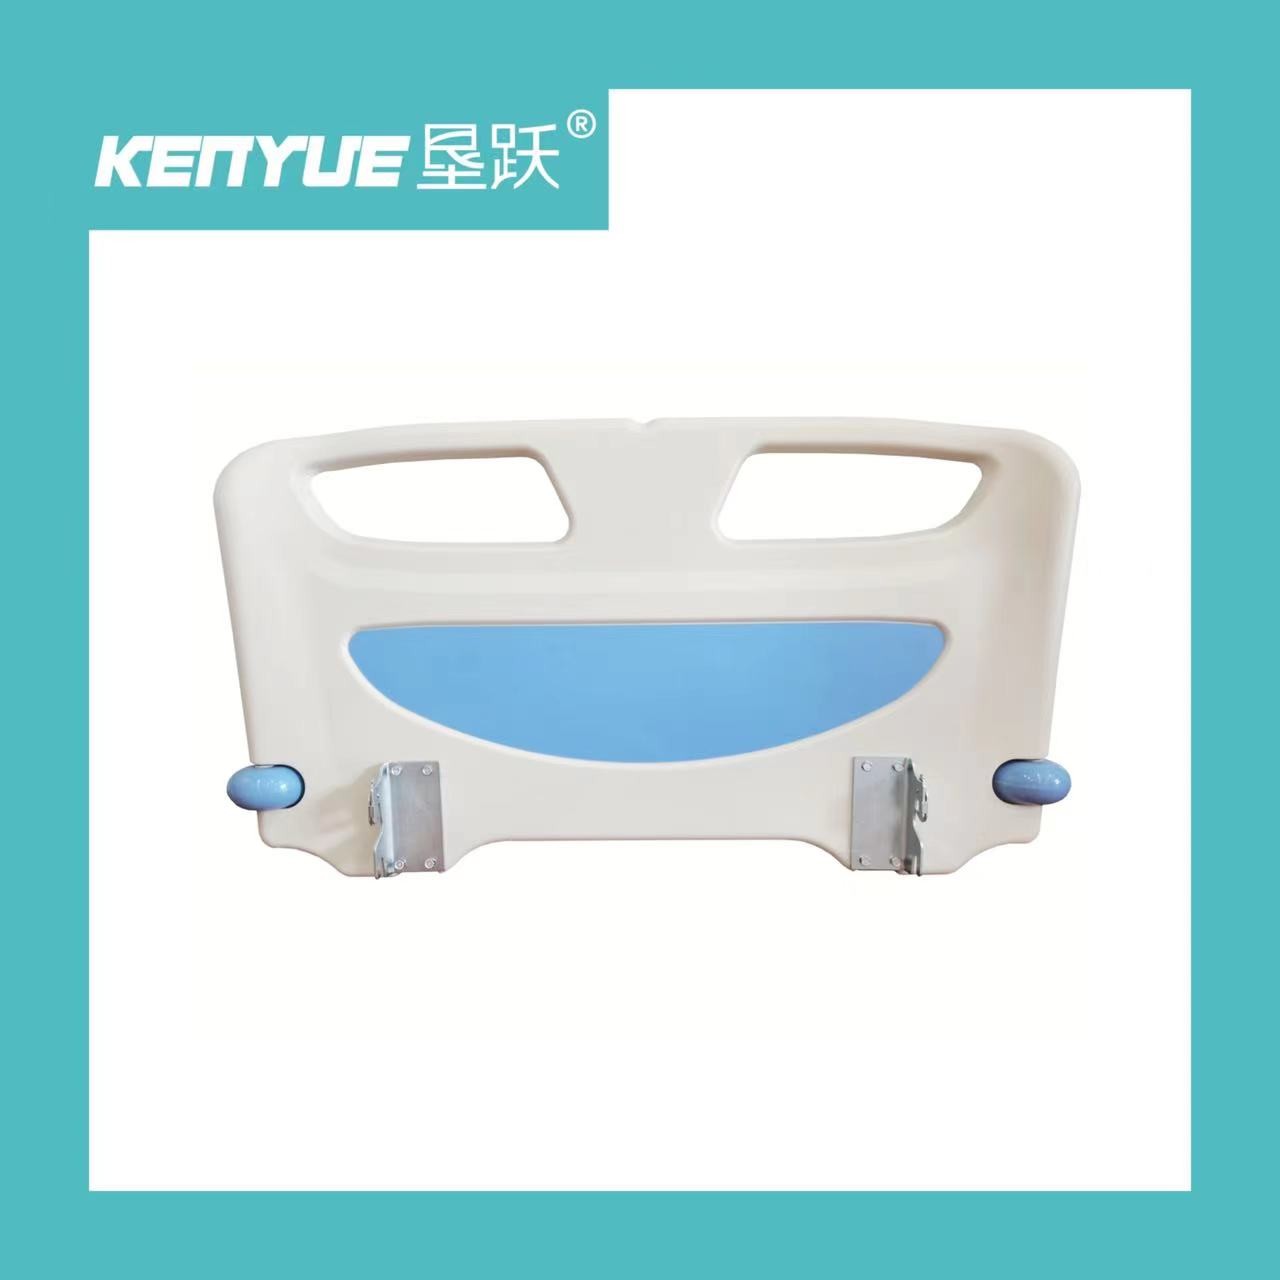  Patient 95X53.5 cm Hospital Bed Board Hospital Bed Accessories Manufactures